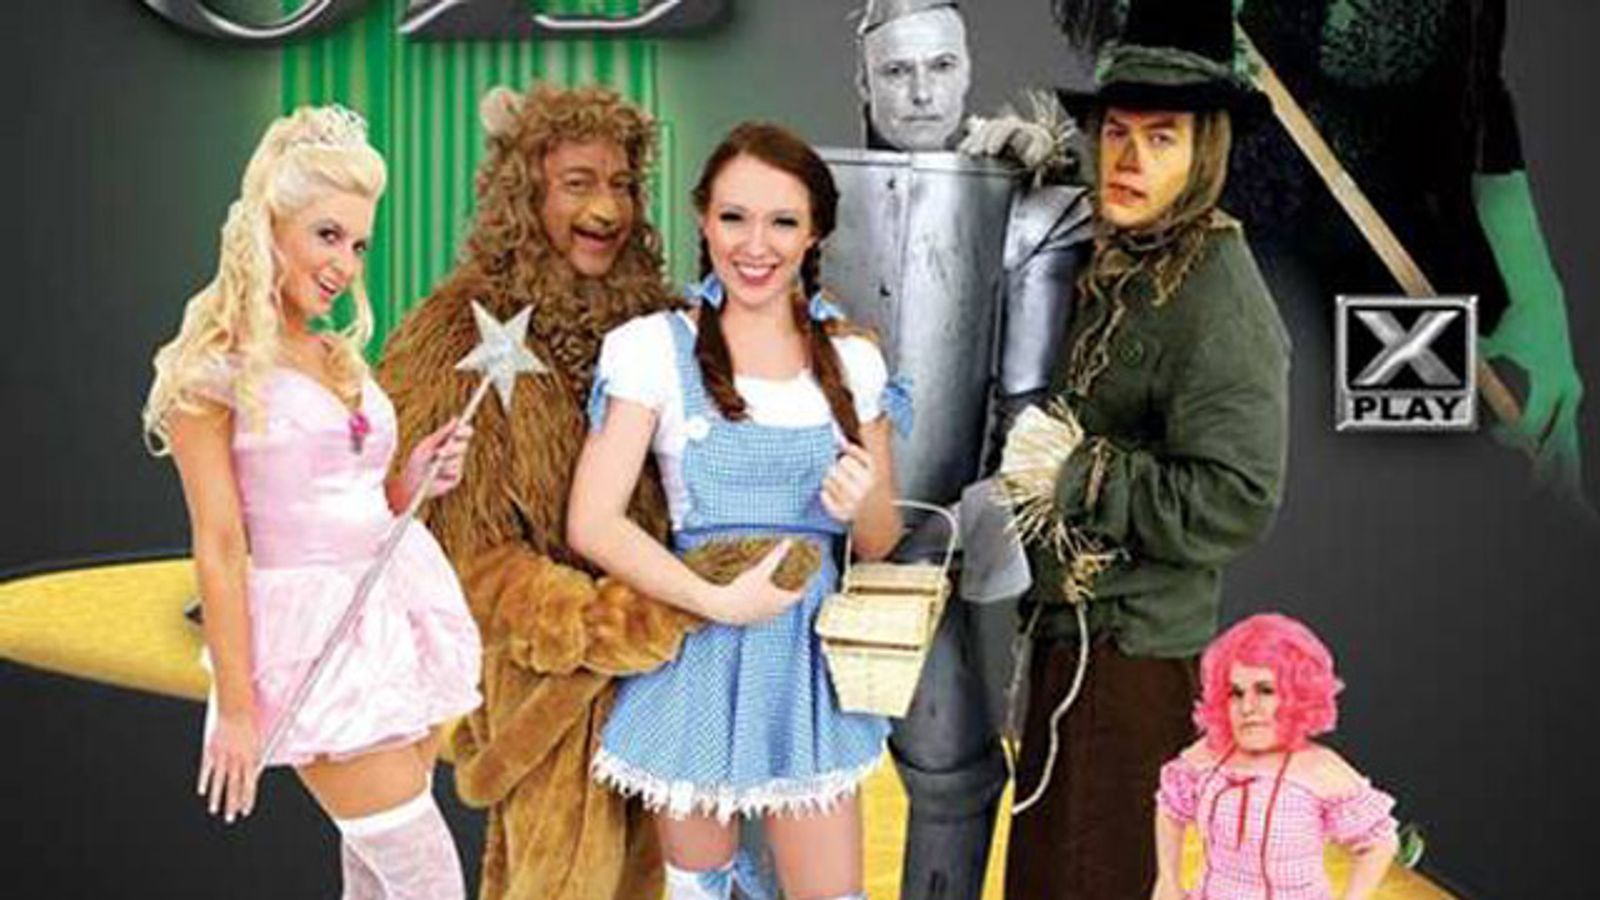 X-Play Releases 'Not the Wizard of Oz XXX' Trailer